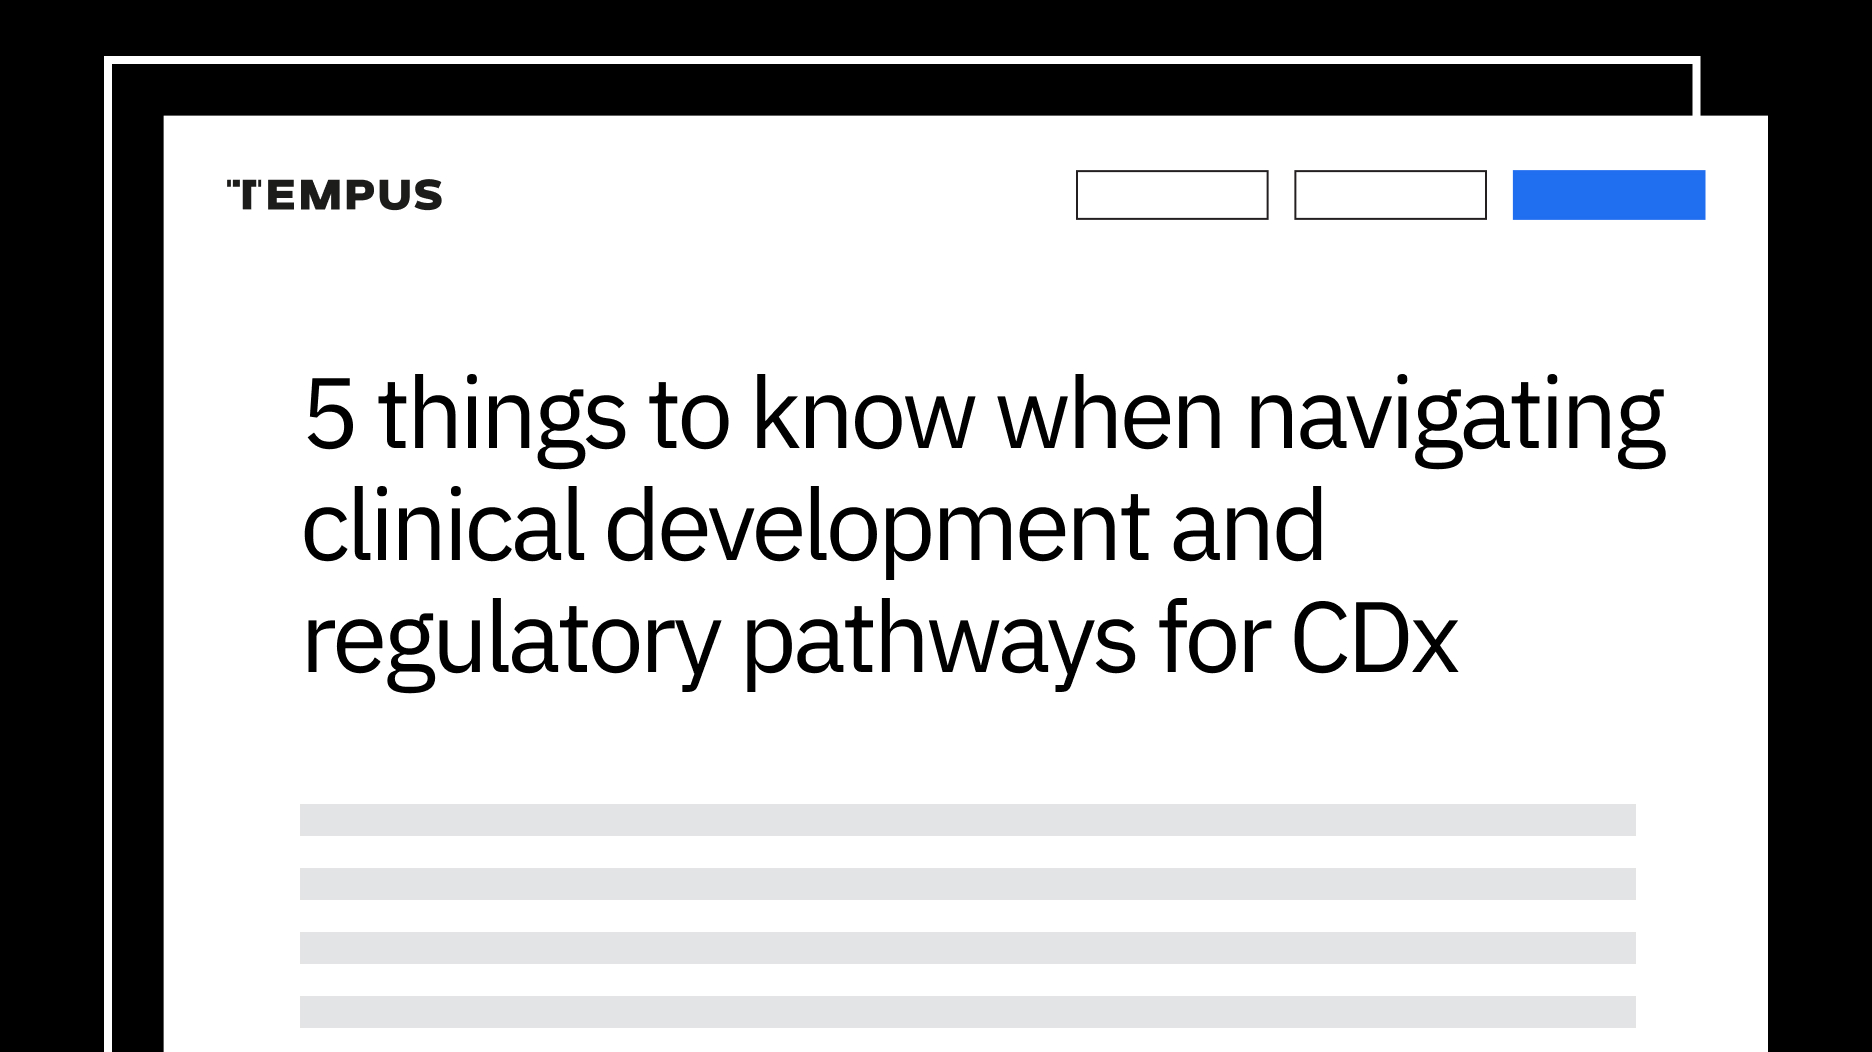 5 things to know when navigating clinical development and regulatory pathways for CDx